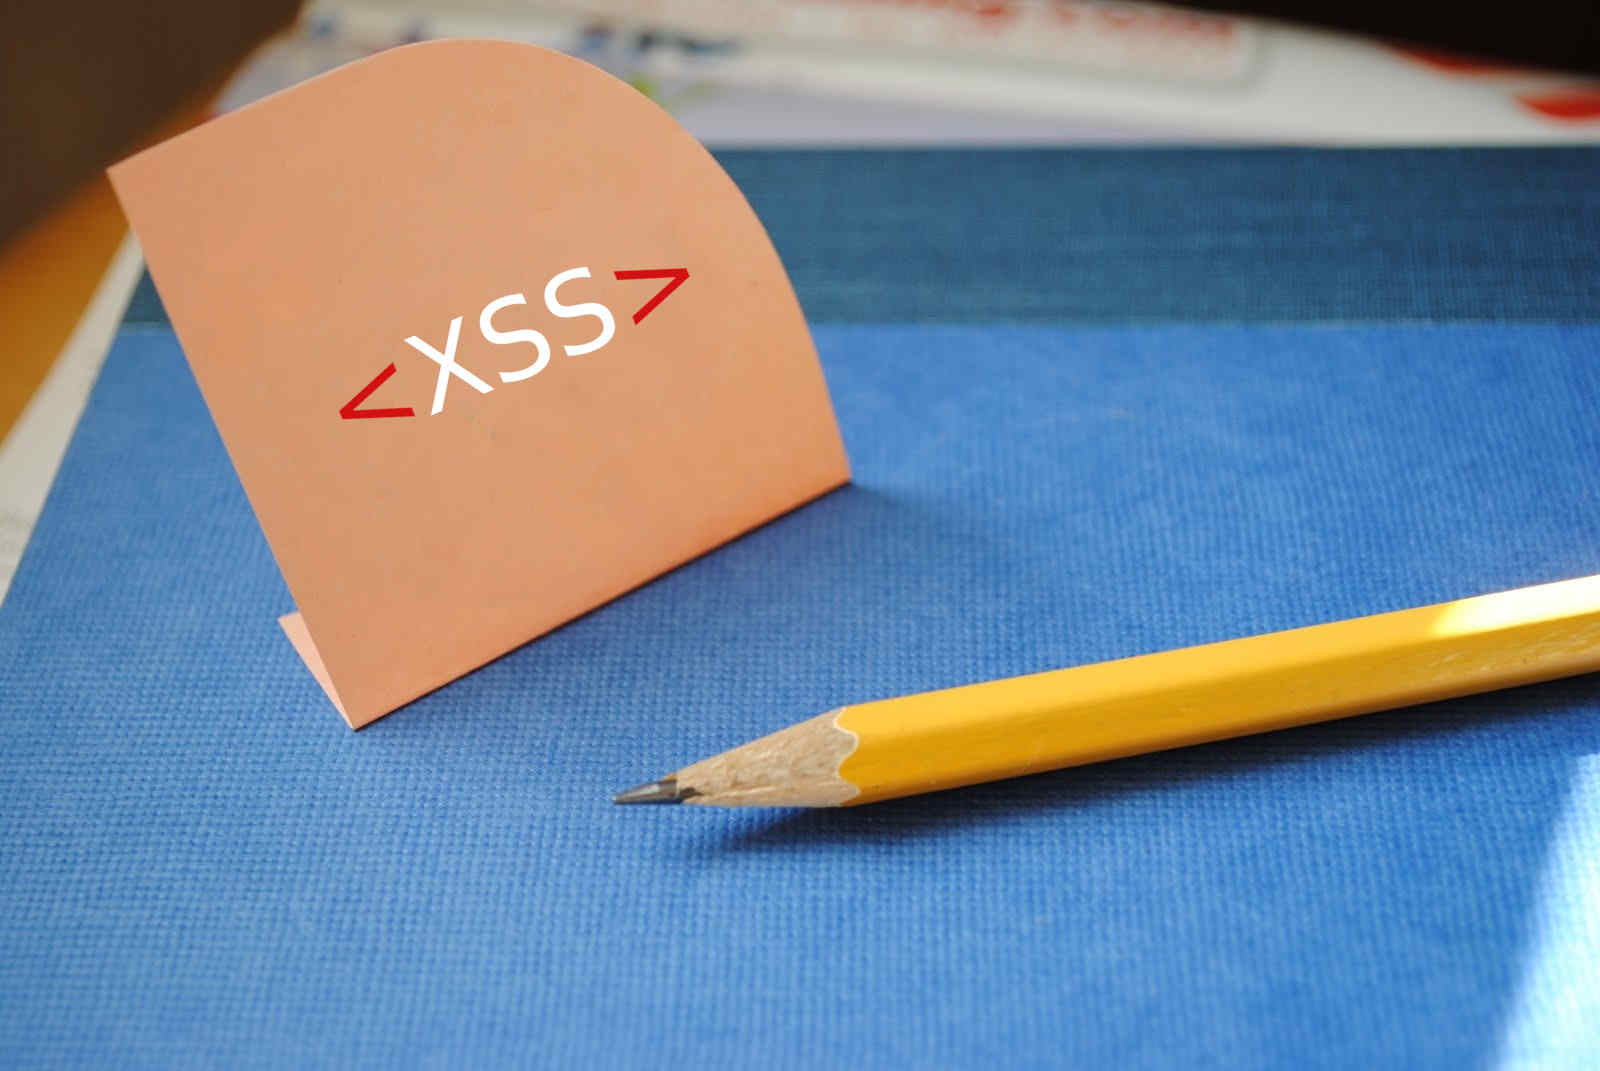 xss in style article cover